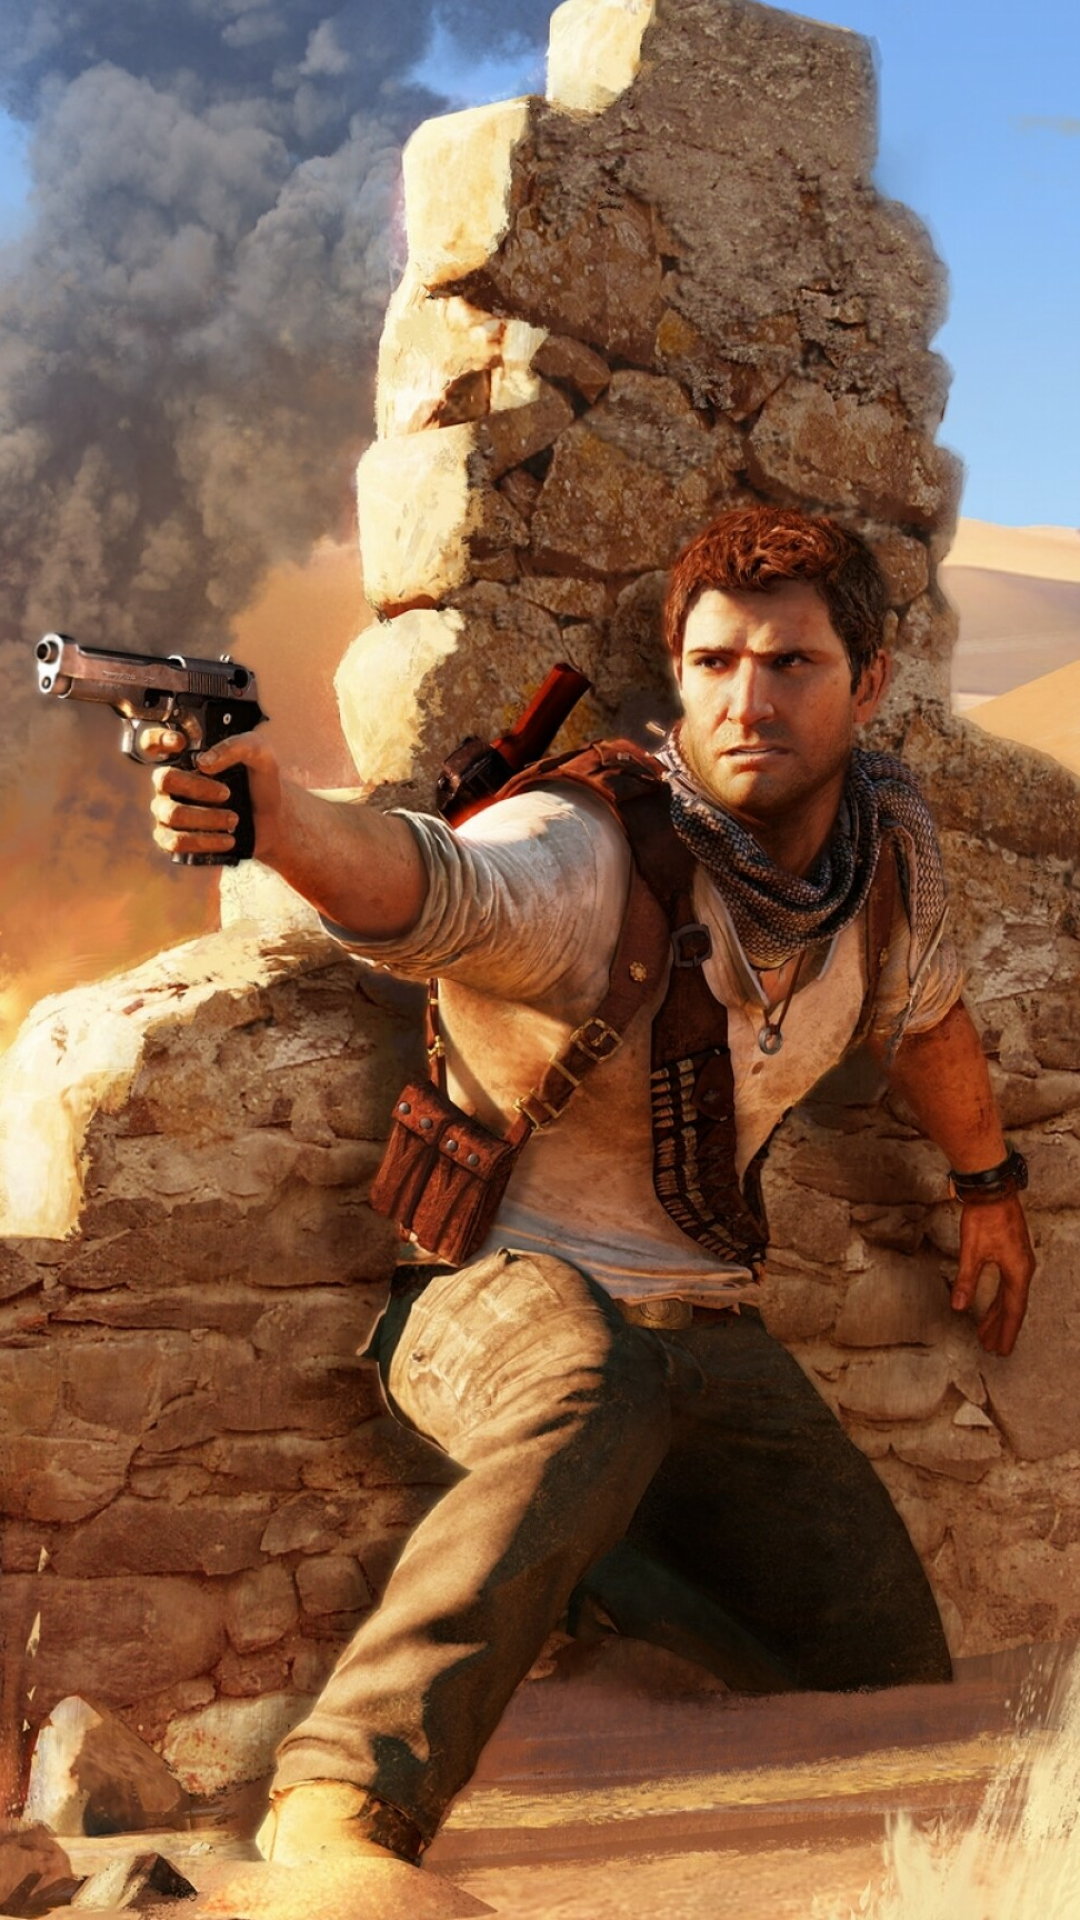 Uncharted: The game series that is one of the best action adventure franchises in recent gaming history, Developed by Naughty Dog. 1080x1920 Full HD Wallpaper.